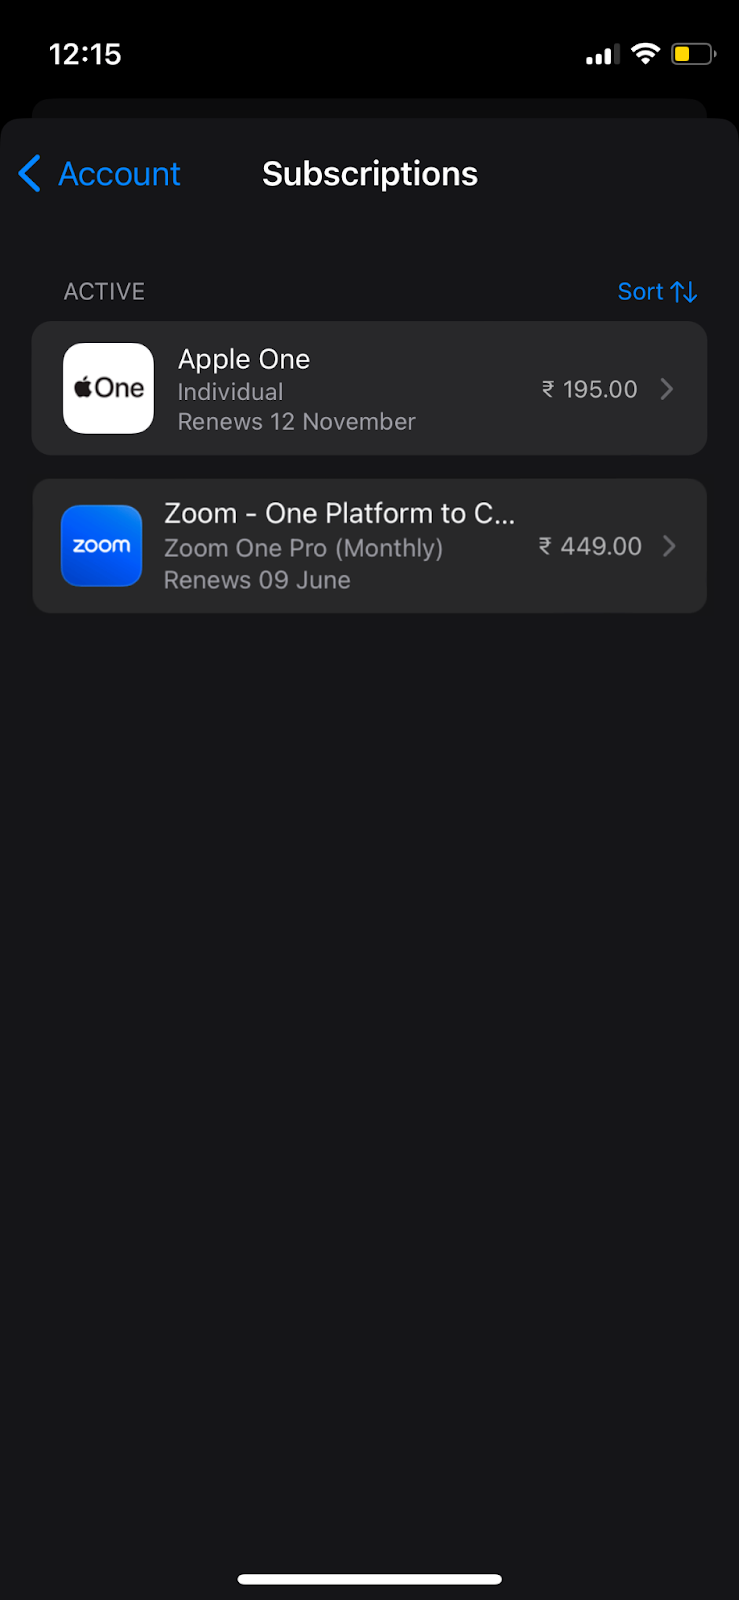 How to Cancel Zoom Subscription - Apple App Store subscriptions